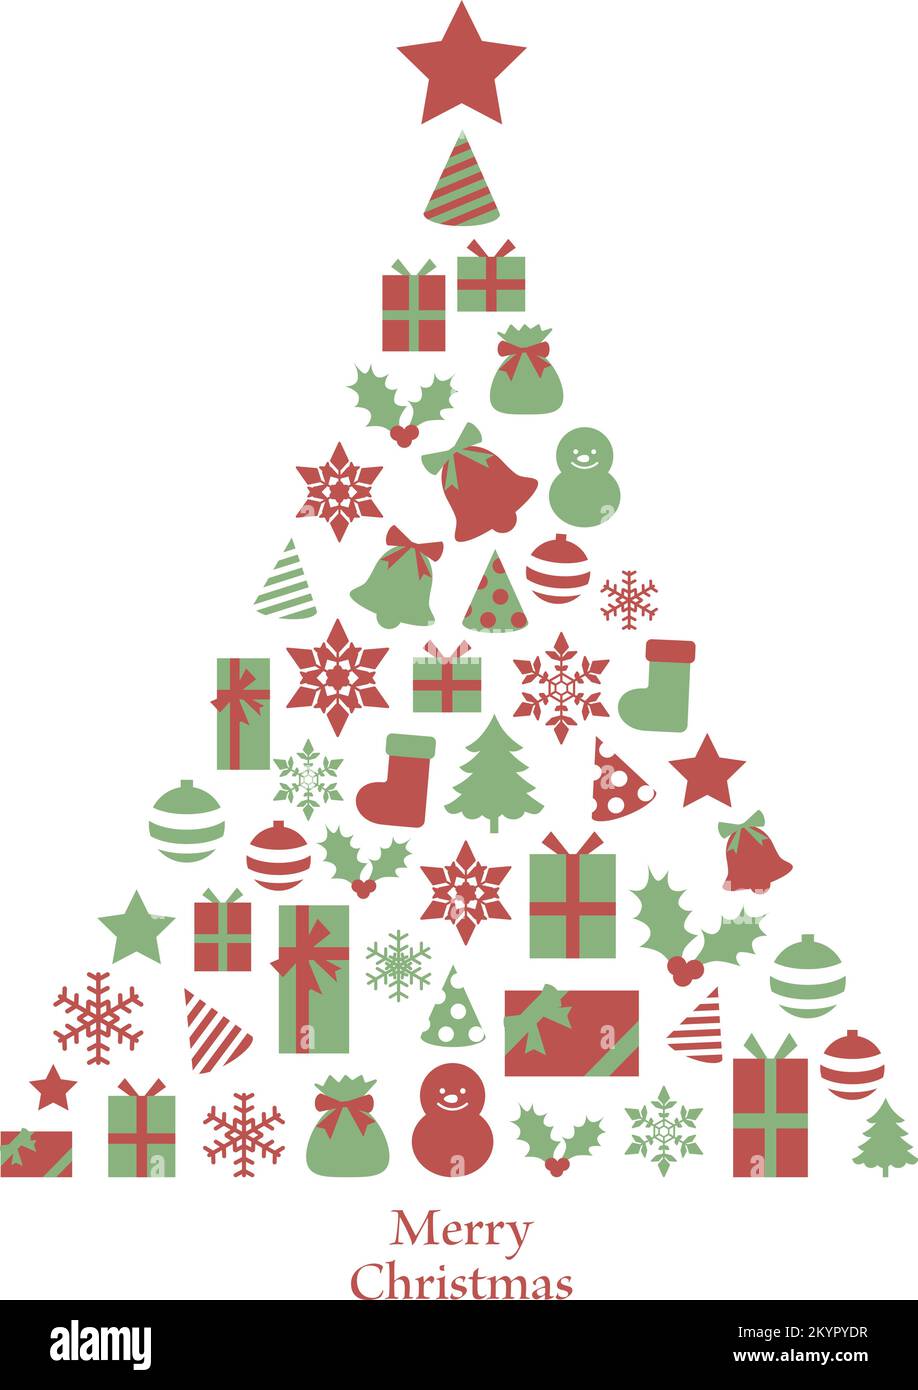 Tree design made of Christmas items. Green and red. Stock Vector